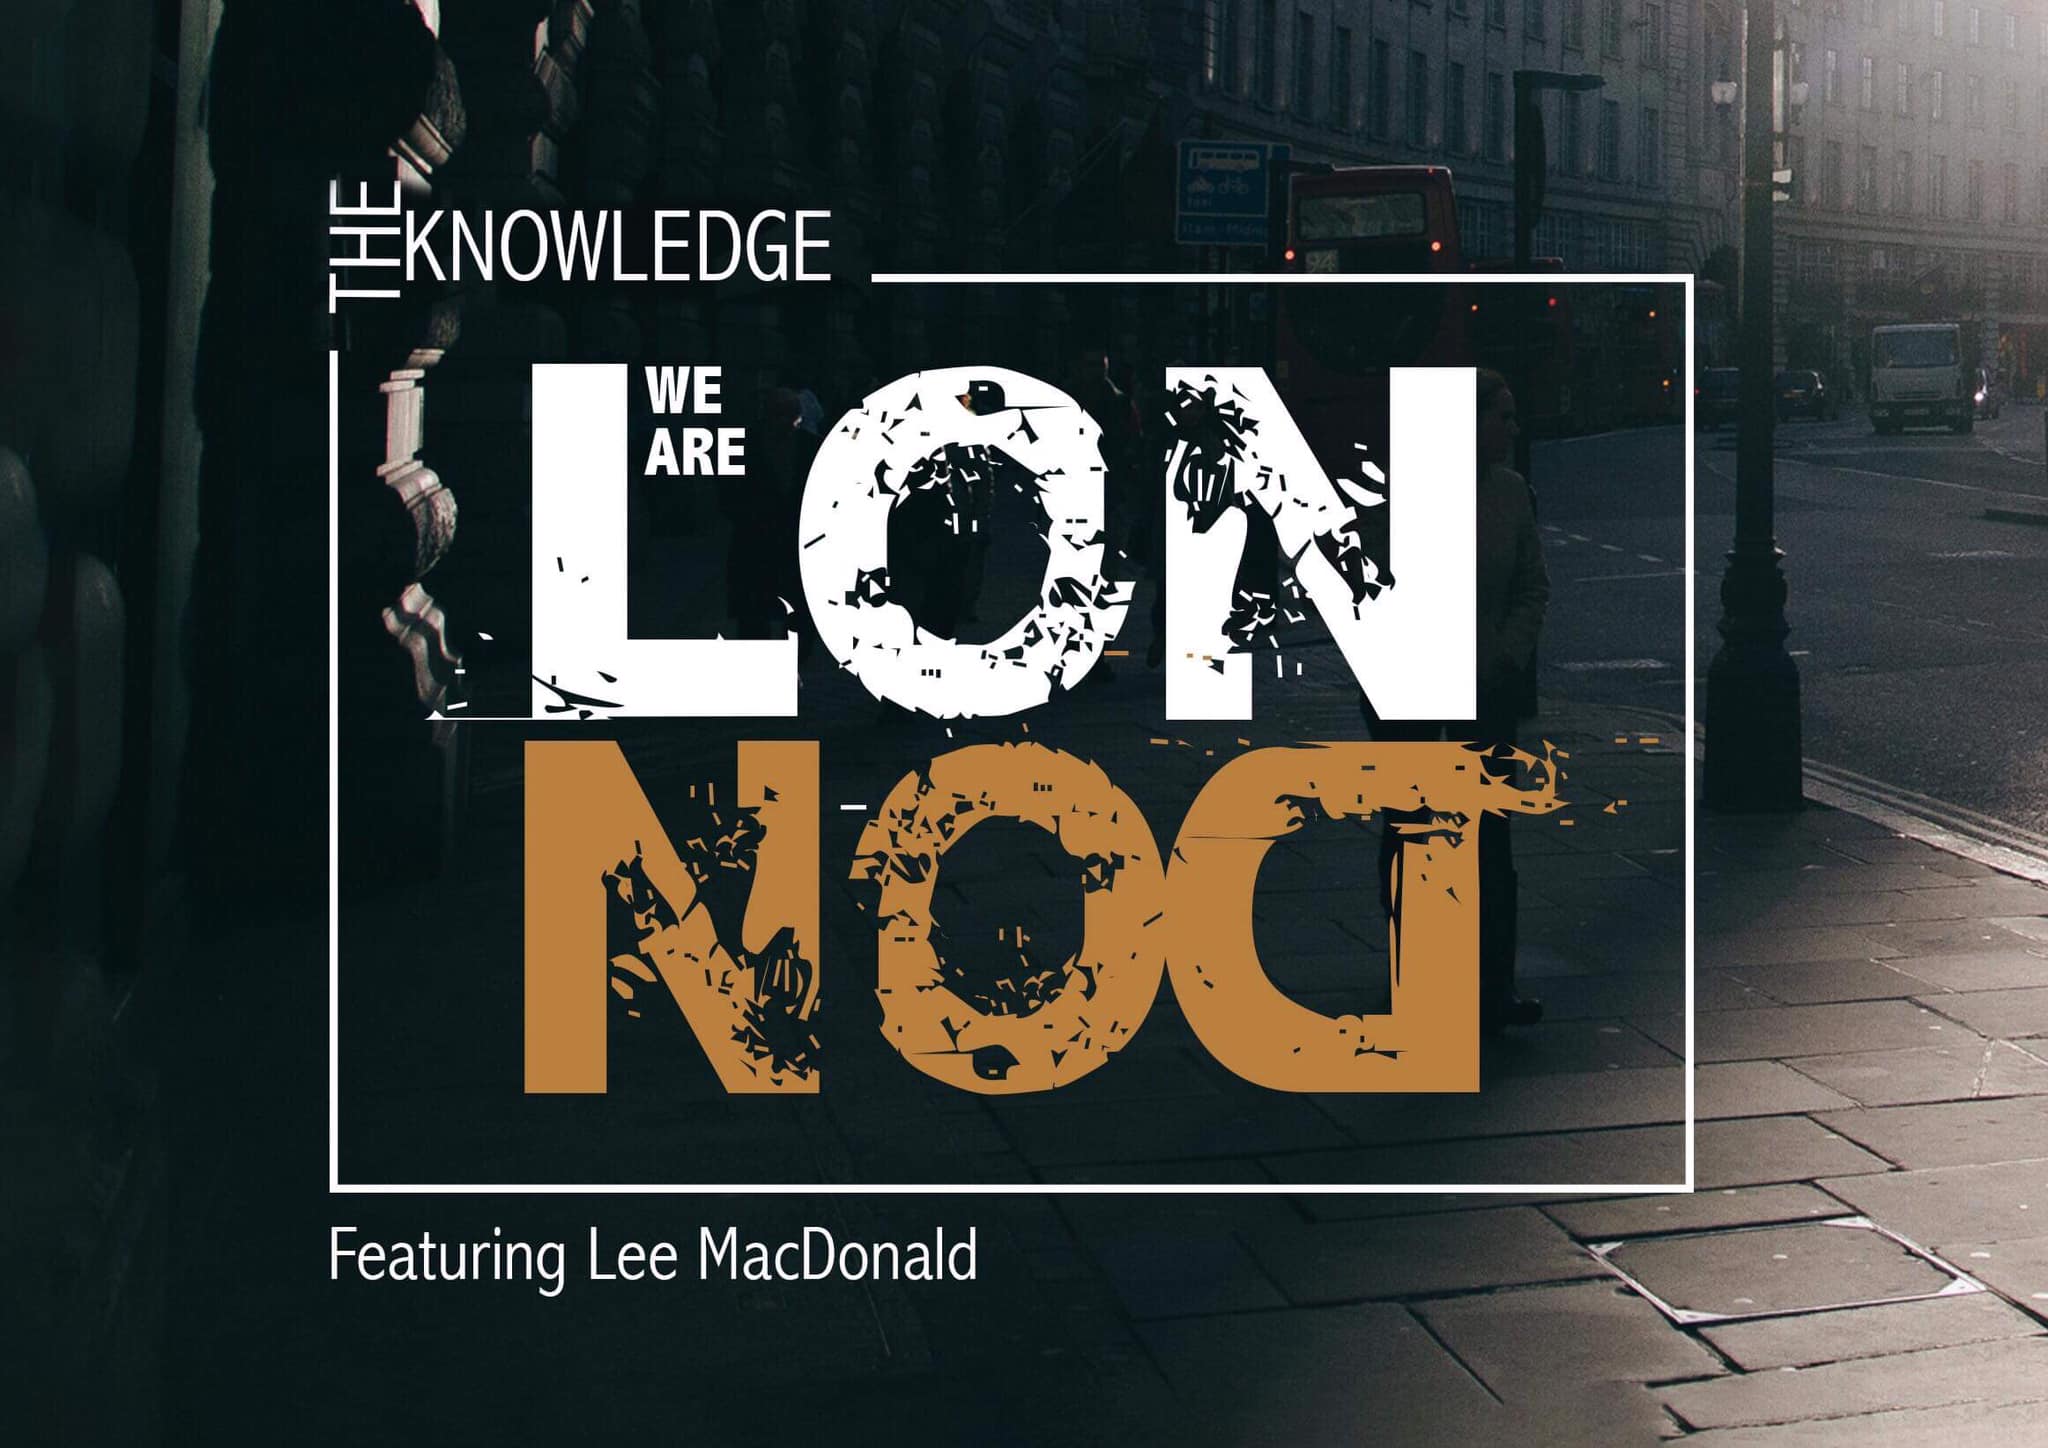 A new anthem for London & the cab trade as “We Are London” by The Knowledge hits the streets